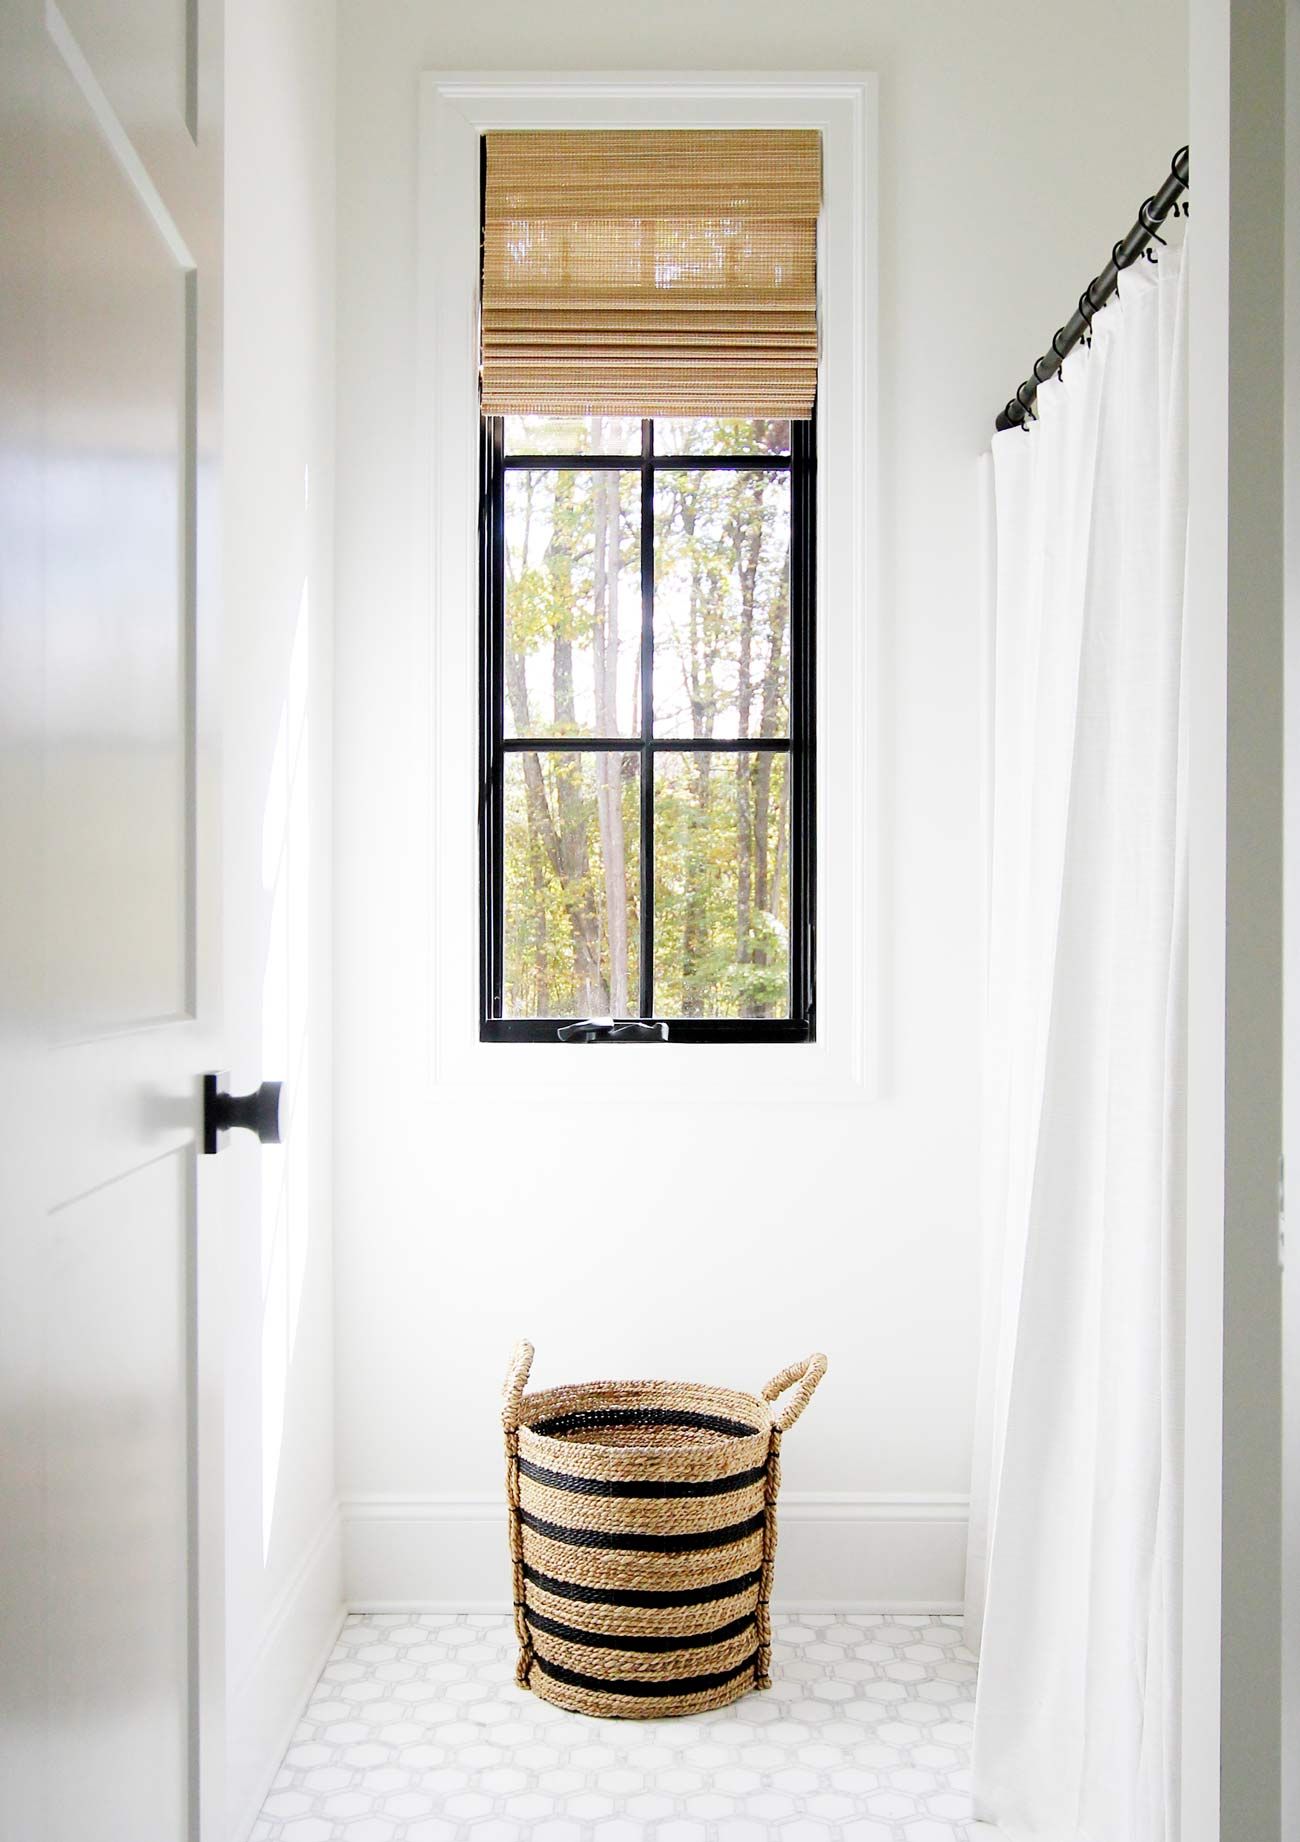 The Benefits of Using Window Curtains in
the Bathroom